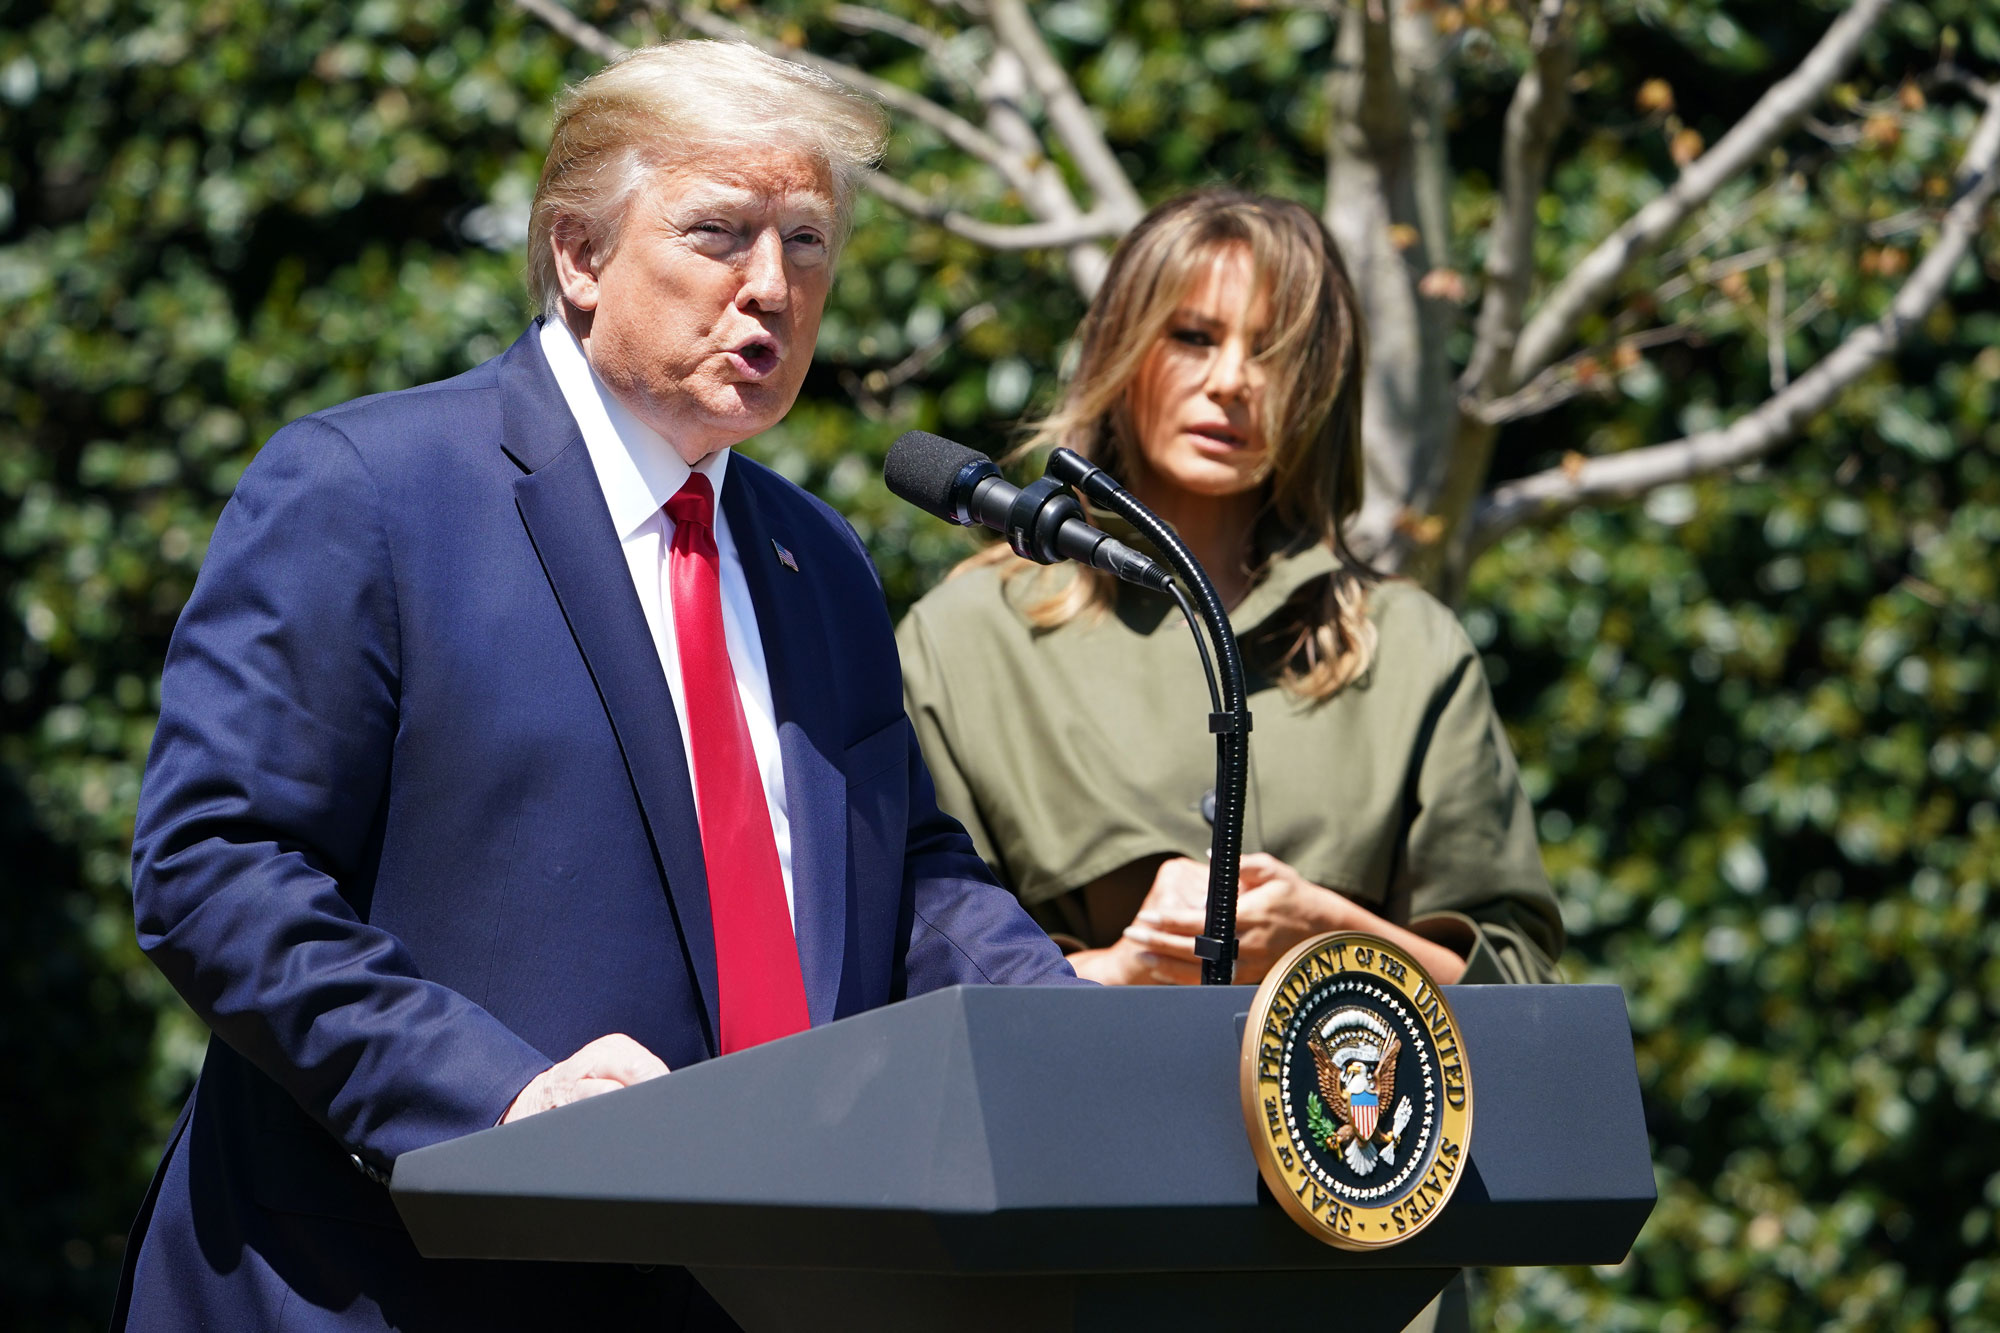 US President Donald Trump speaks on the South Lawn of the White House in Washington, on April 22.